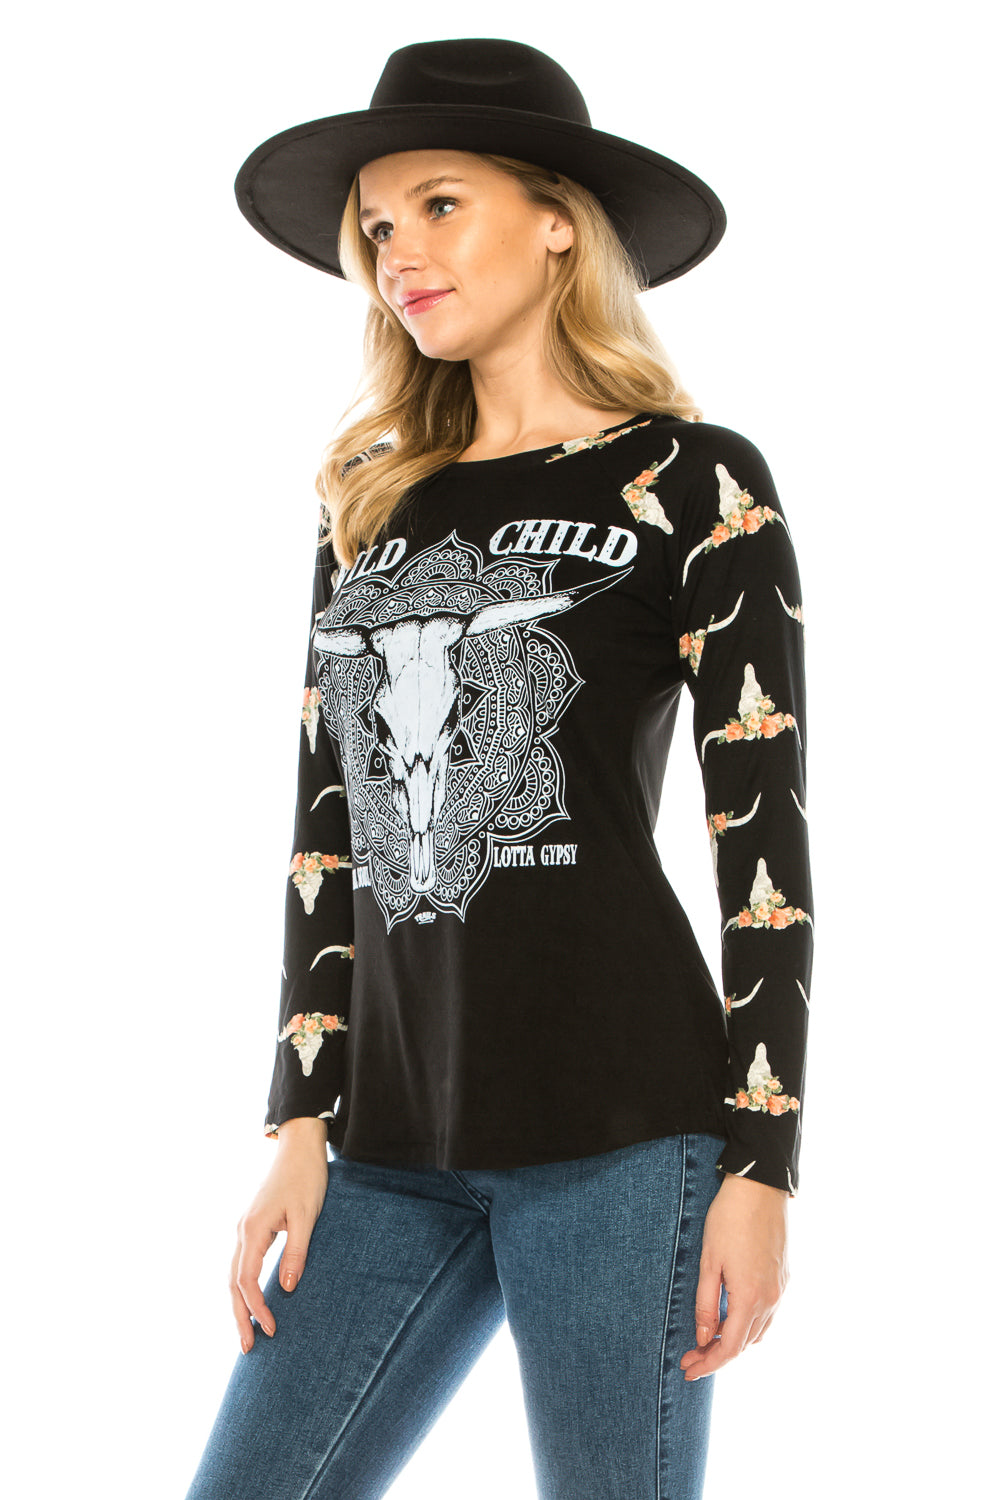 WILD CHILD LONG SLEEVE TOP - Trailsclothing.com